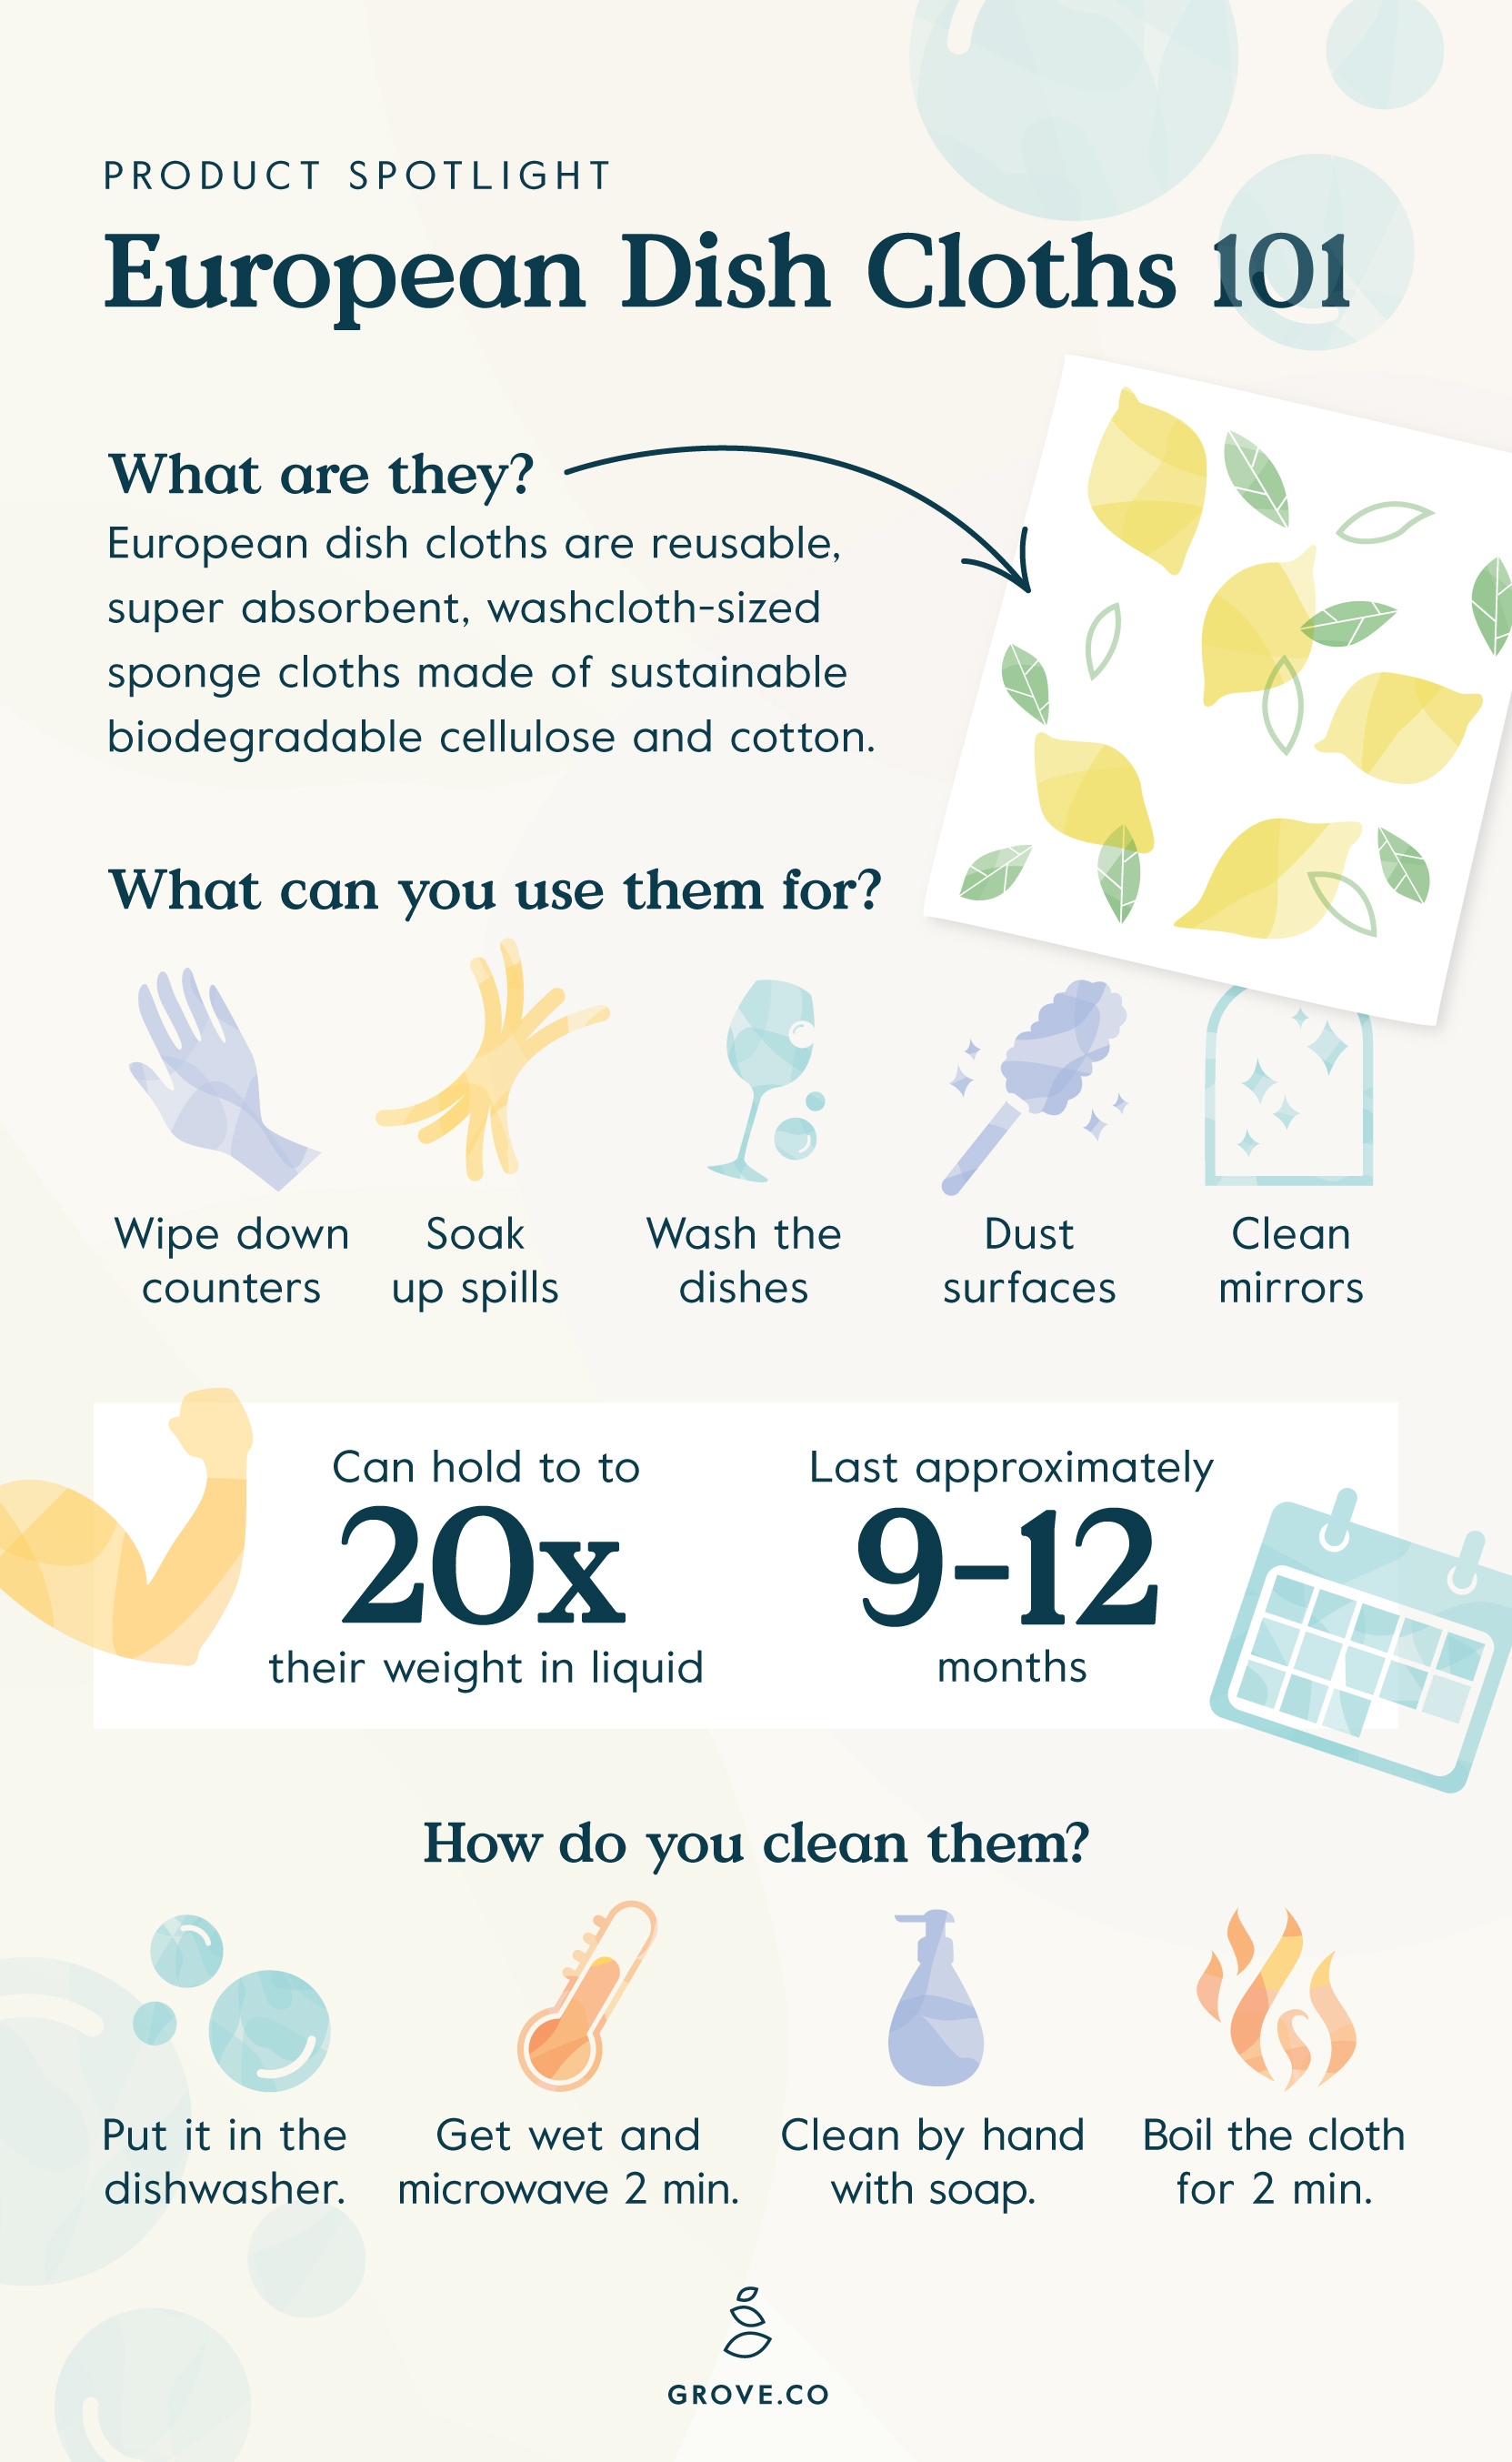 The Ultimate (Free) Guide to Swedish Dishcloths